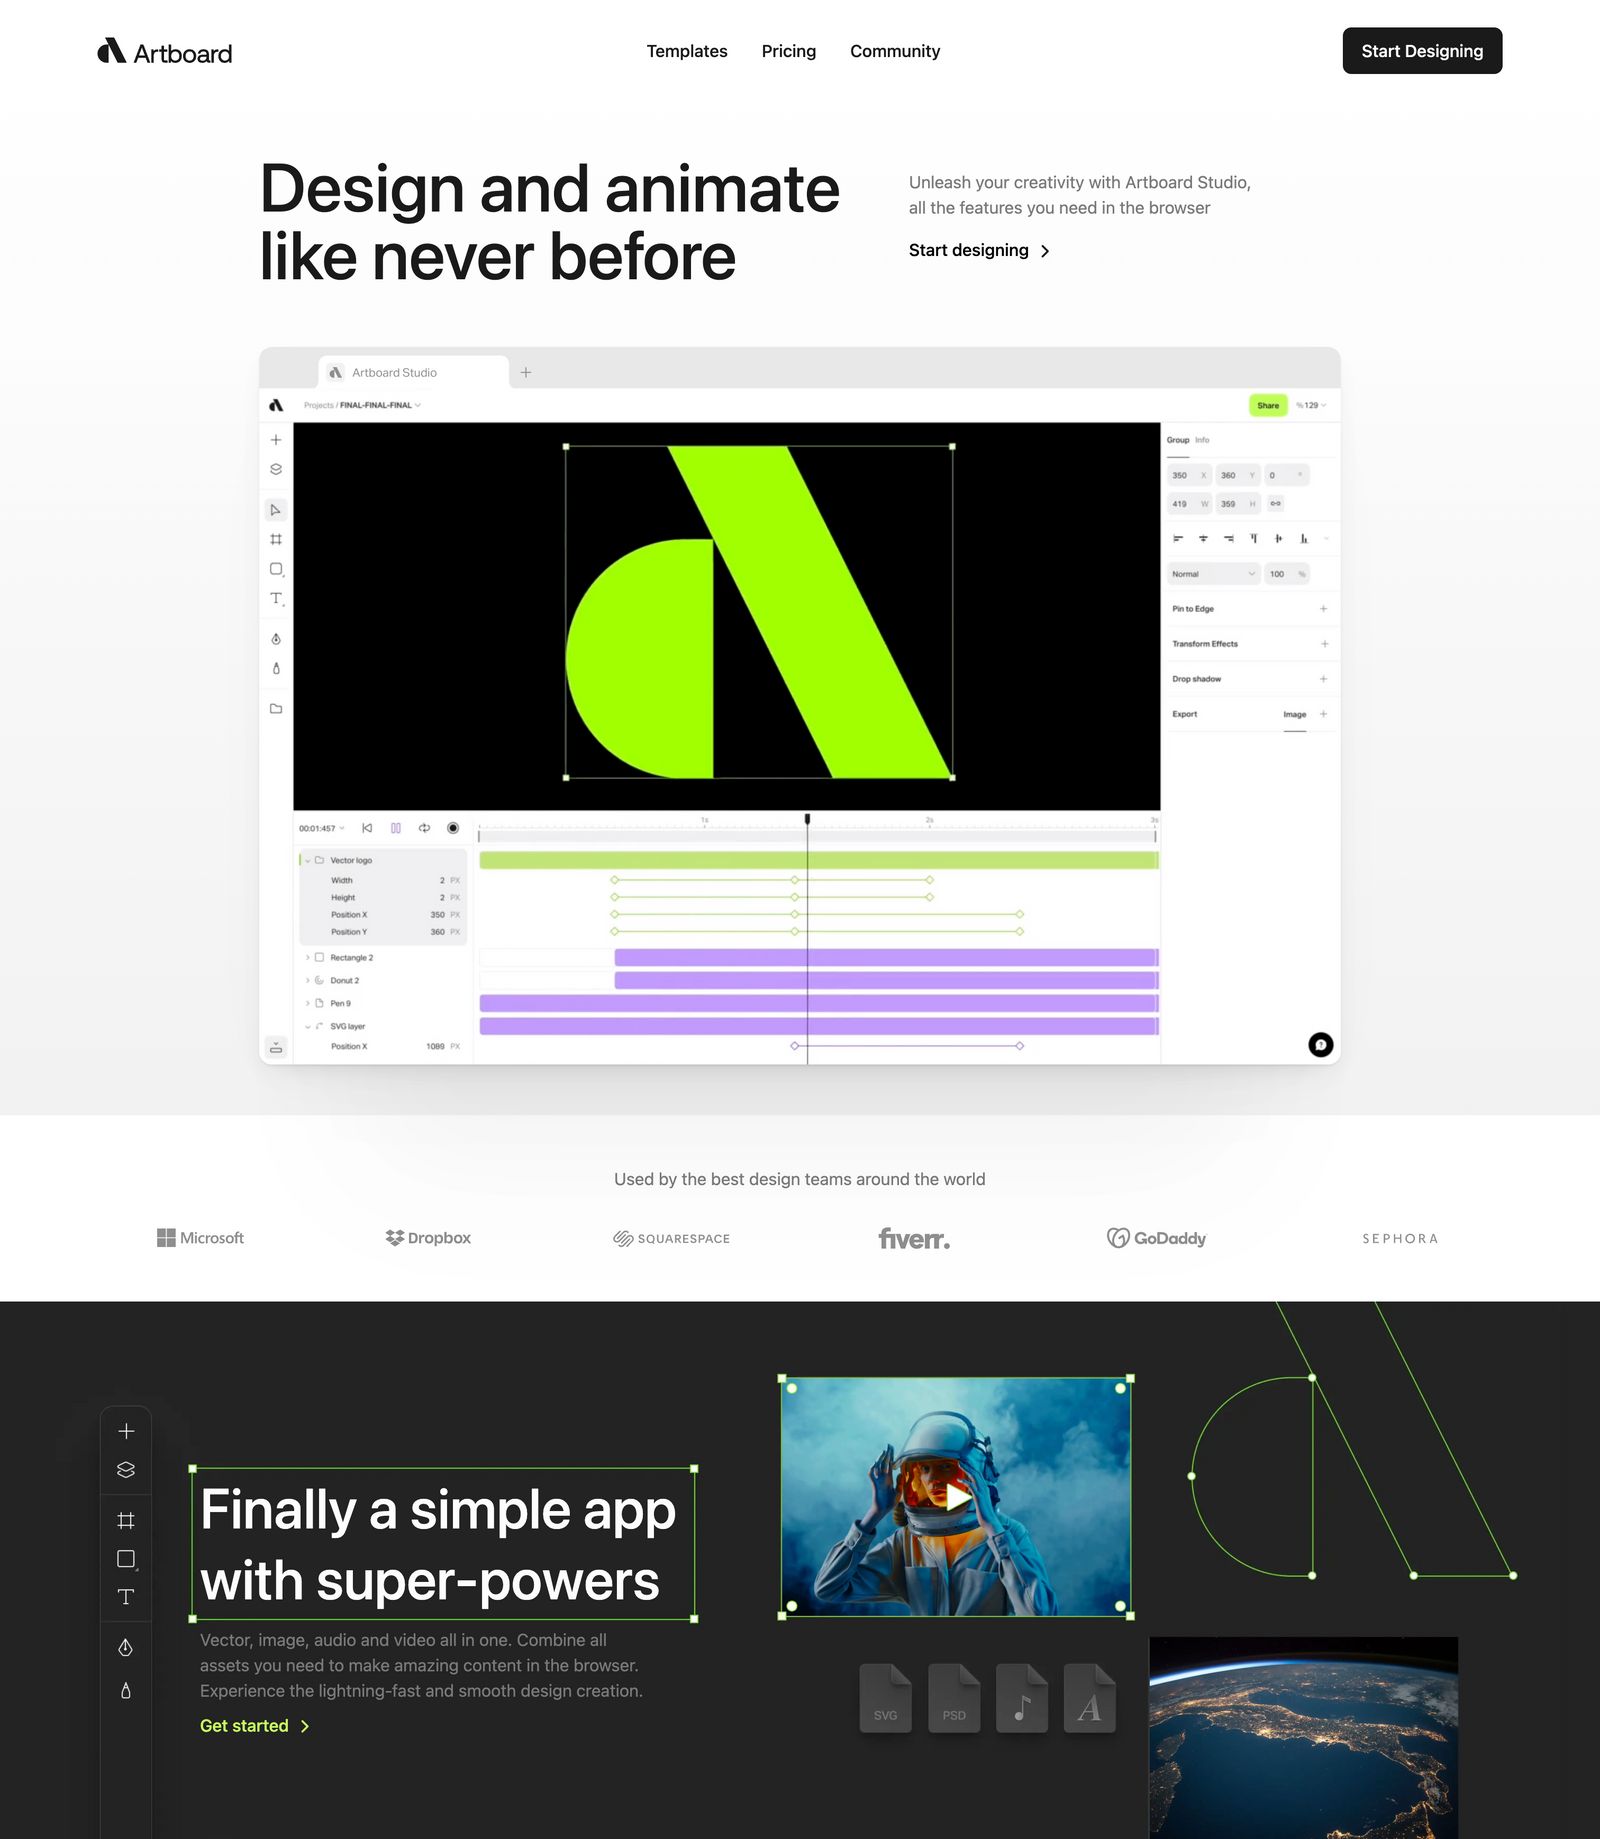 /articles/landing-page-inspiration/landing-page-design-example-16.jpg)_Saas Landing page example from Artboard Studio